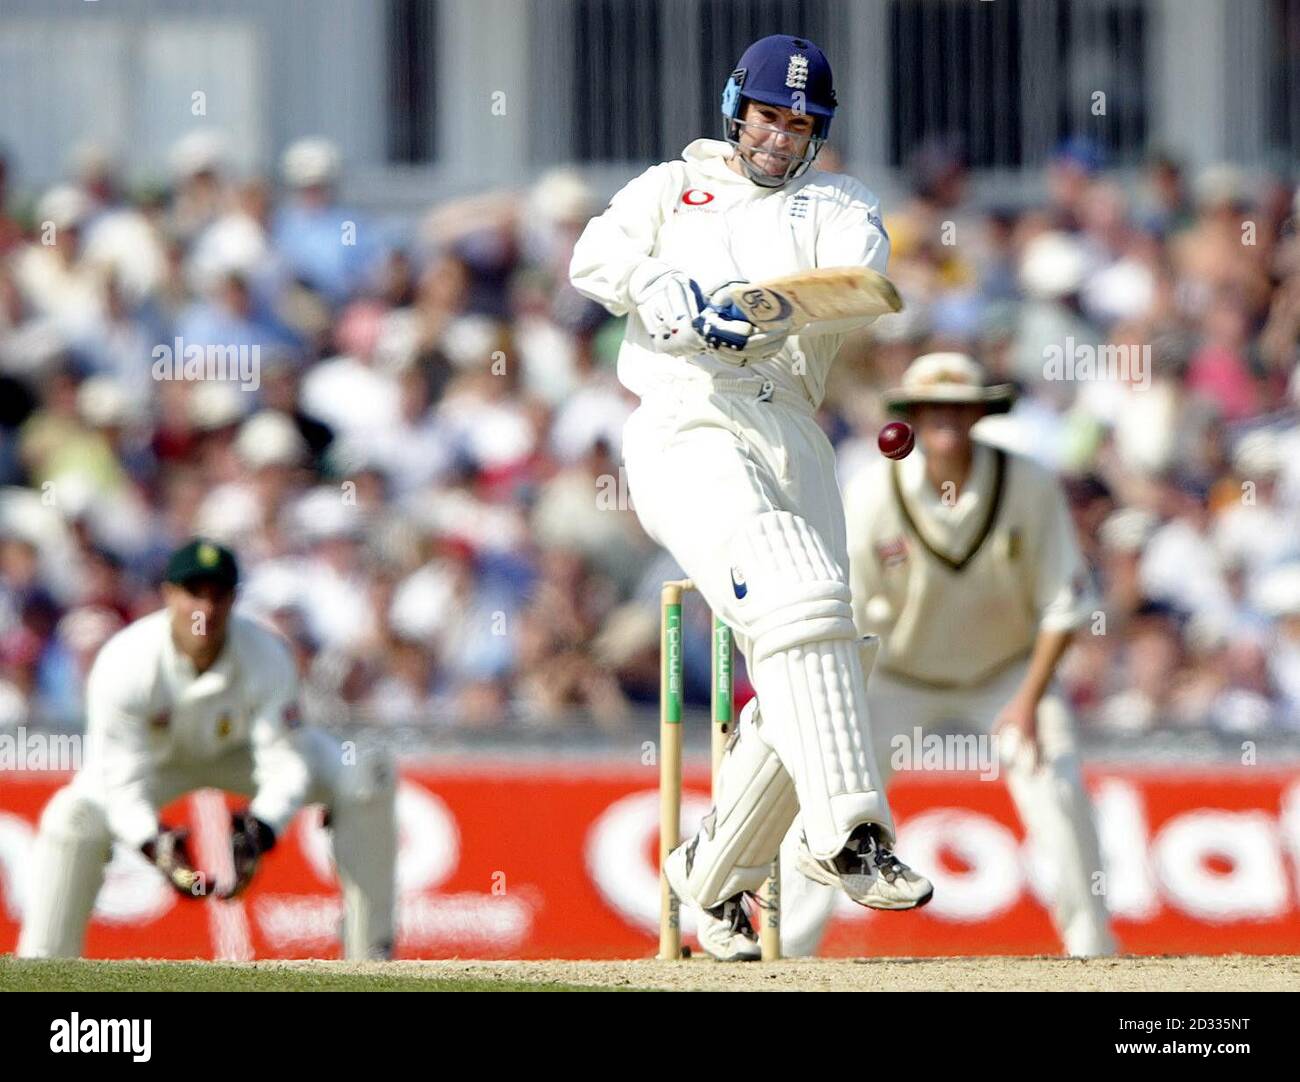 England's Graham Thorpe pulls a delivery off the bowling of South Africa's Makhaya Ntini, during the the third day of the fifth npower test at The Oval, London. Stock Photo